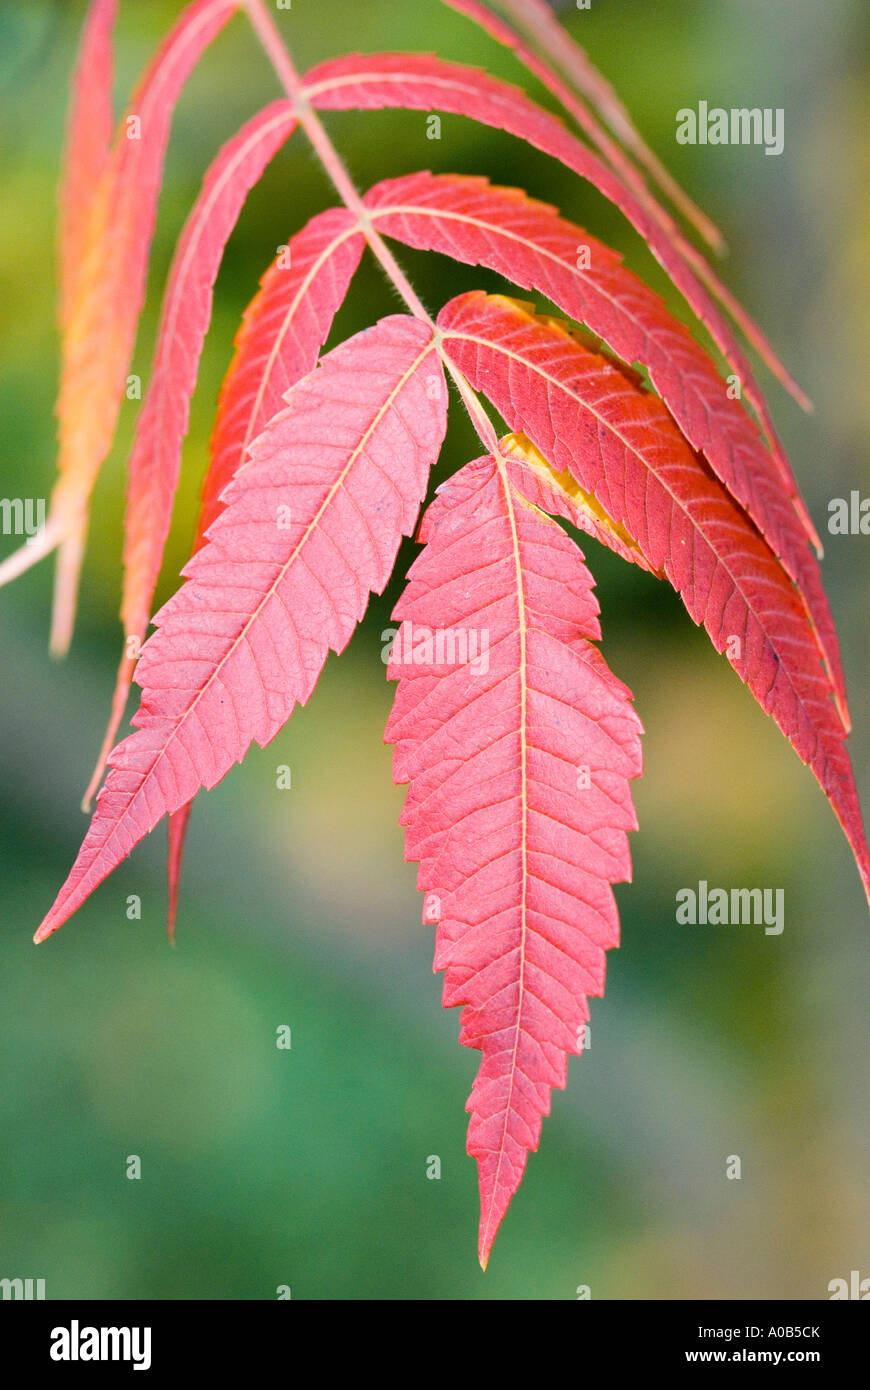 Staghorn sumac leaf turning red in autumn Rhus typhina Stock Photo